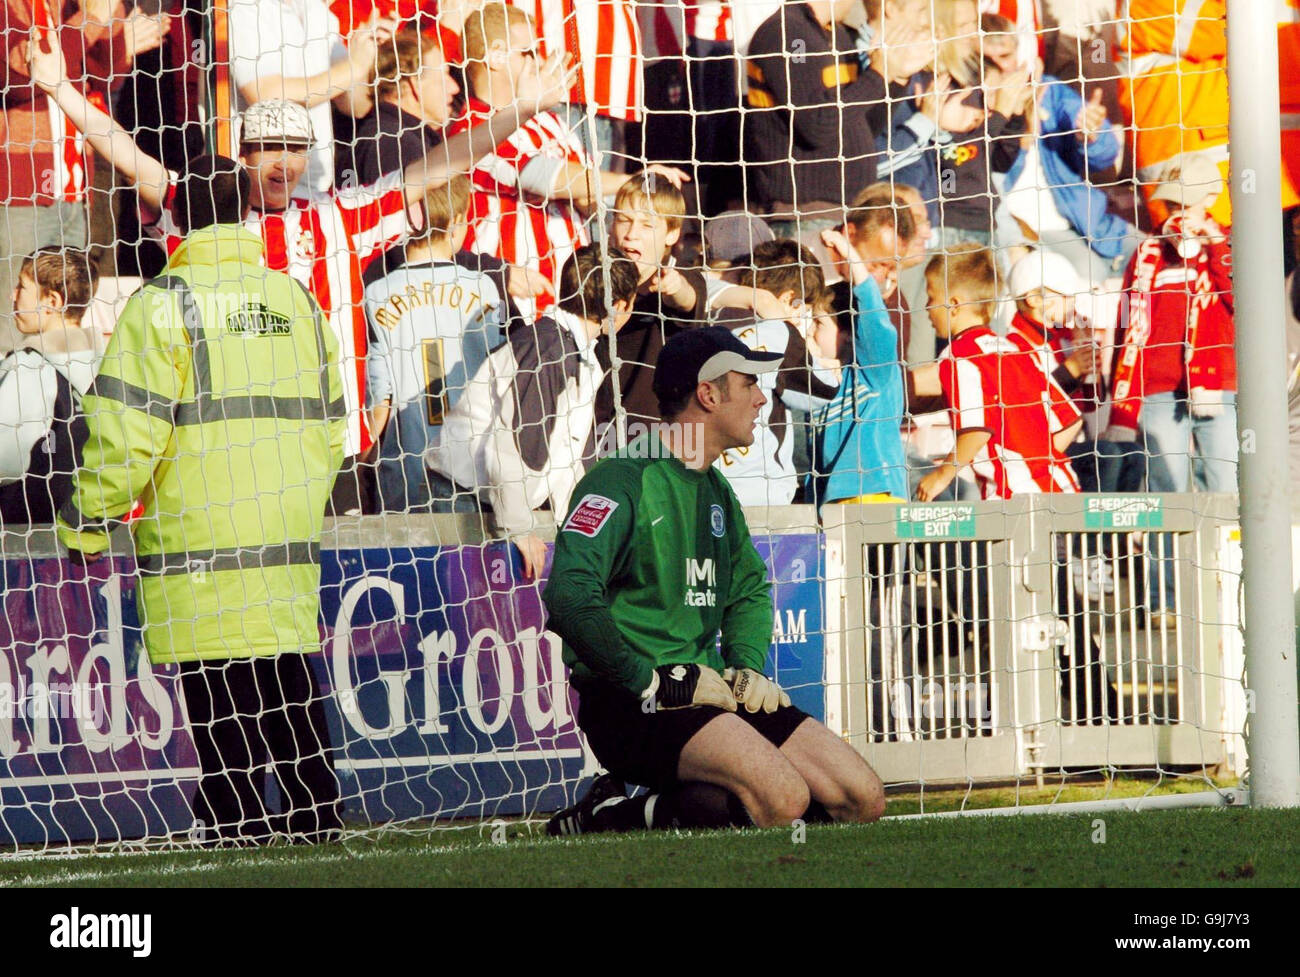 Rochdale's goalkeeper Matthew Gilks kneels in his goalmouth as Lincoln's fans celebrate their team's sixth goal during the Coca-Cola Division Two match at Sincil Bank, Lincoln. Stock Photo